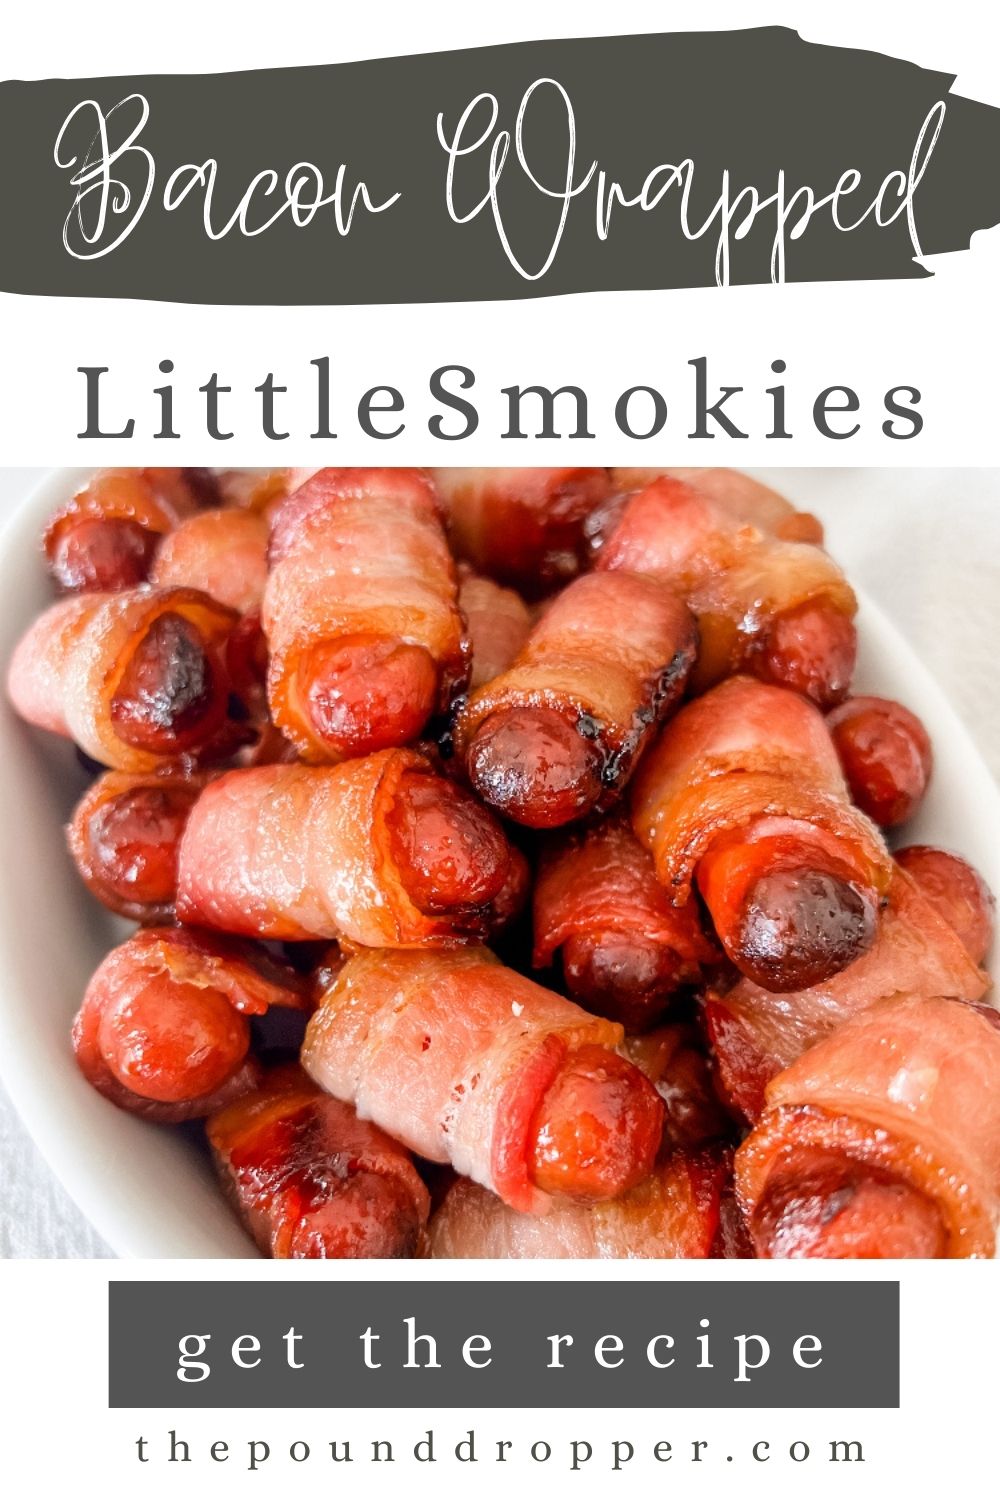 Bacon Wrapped Smokies are the perfect appetizer, snack, or meal! Make them for your next gathering or game day party and watch these quickly disappear! via @pounddropper